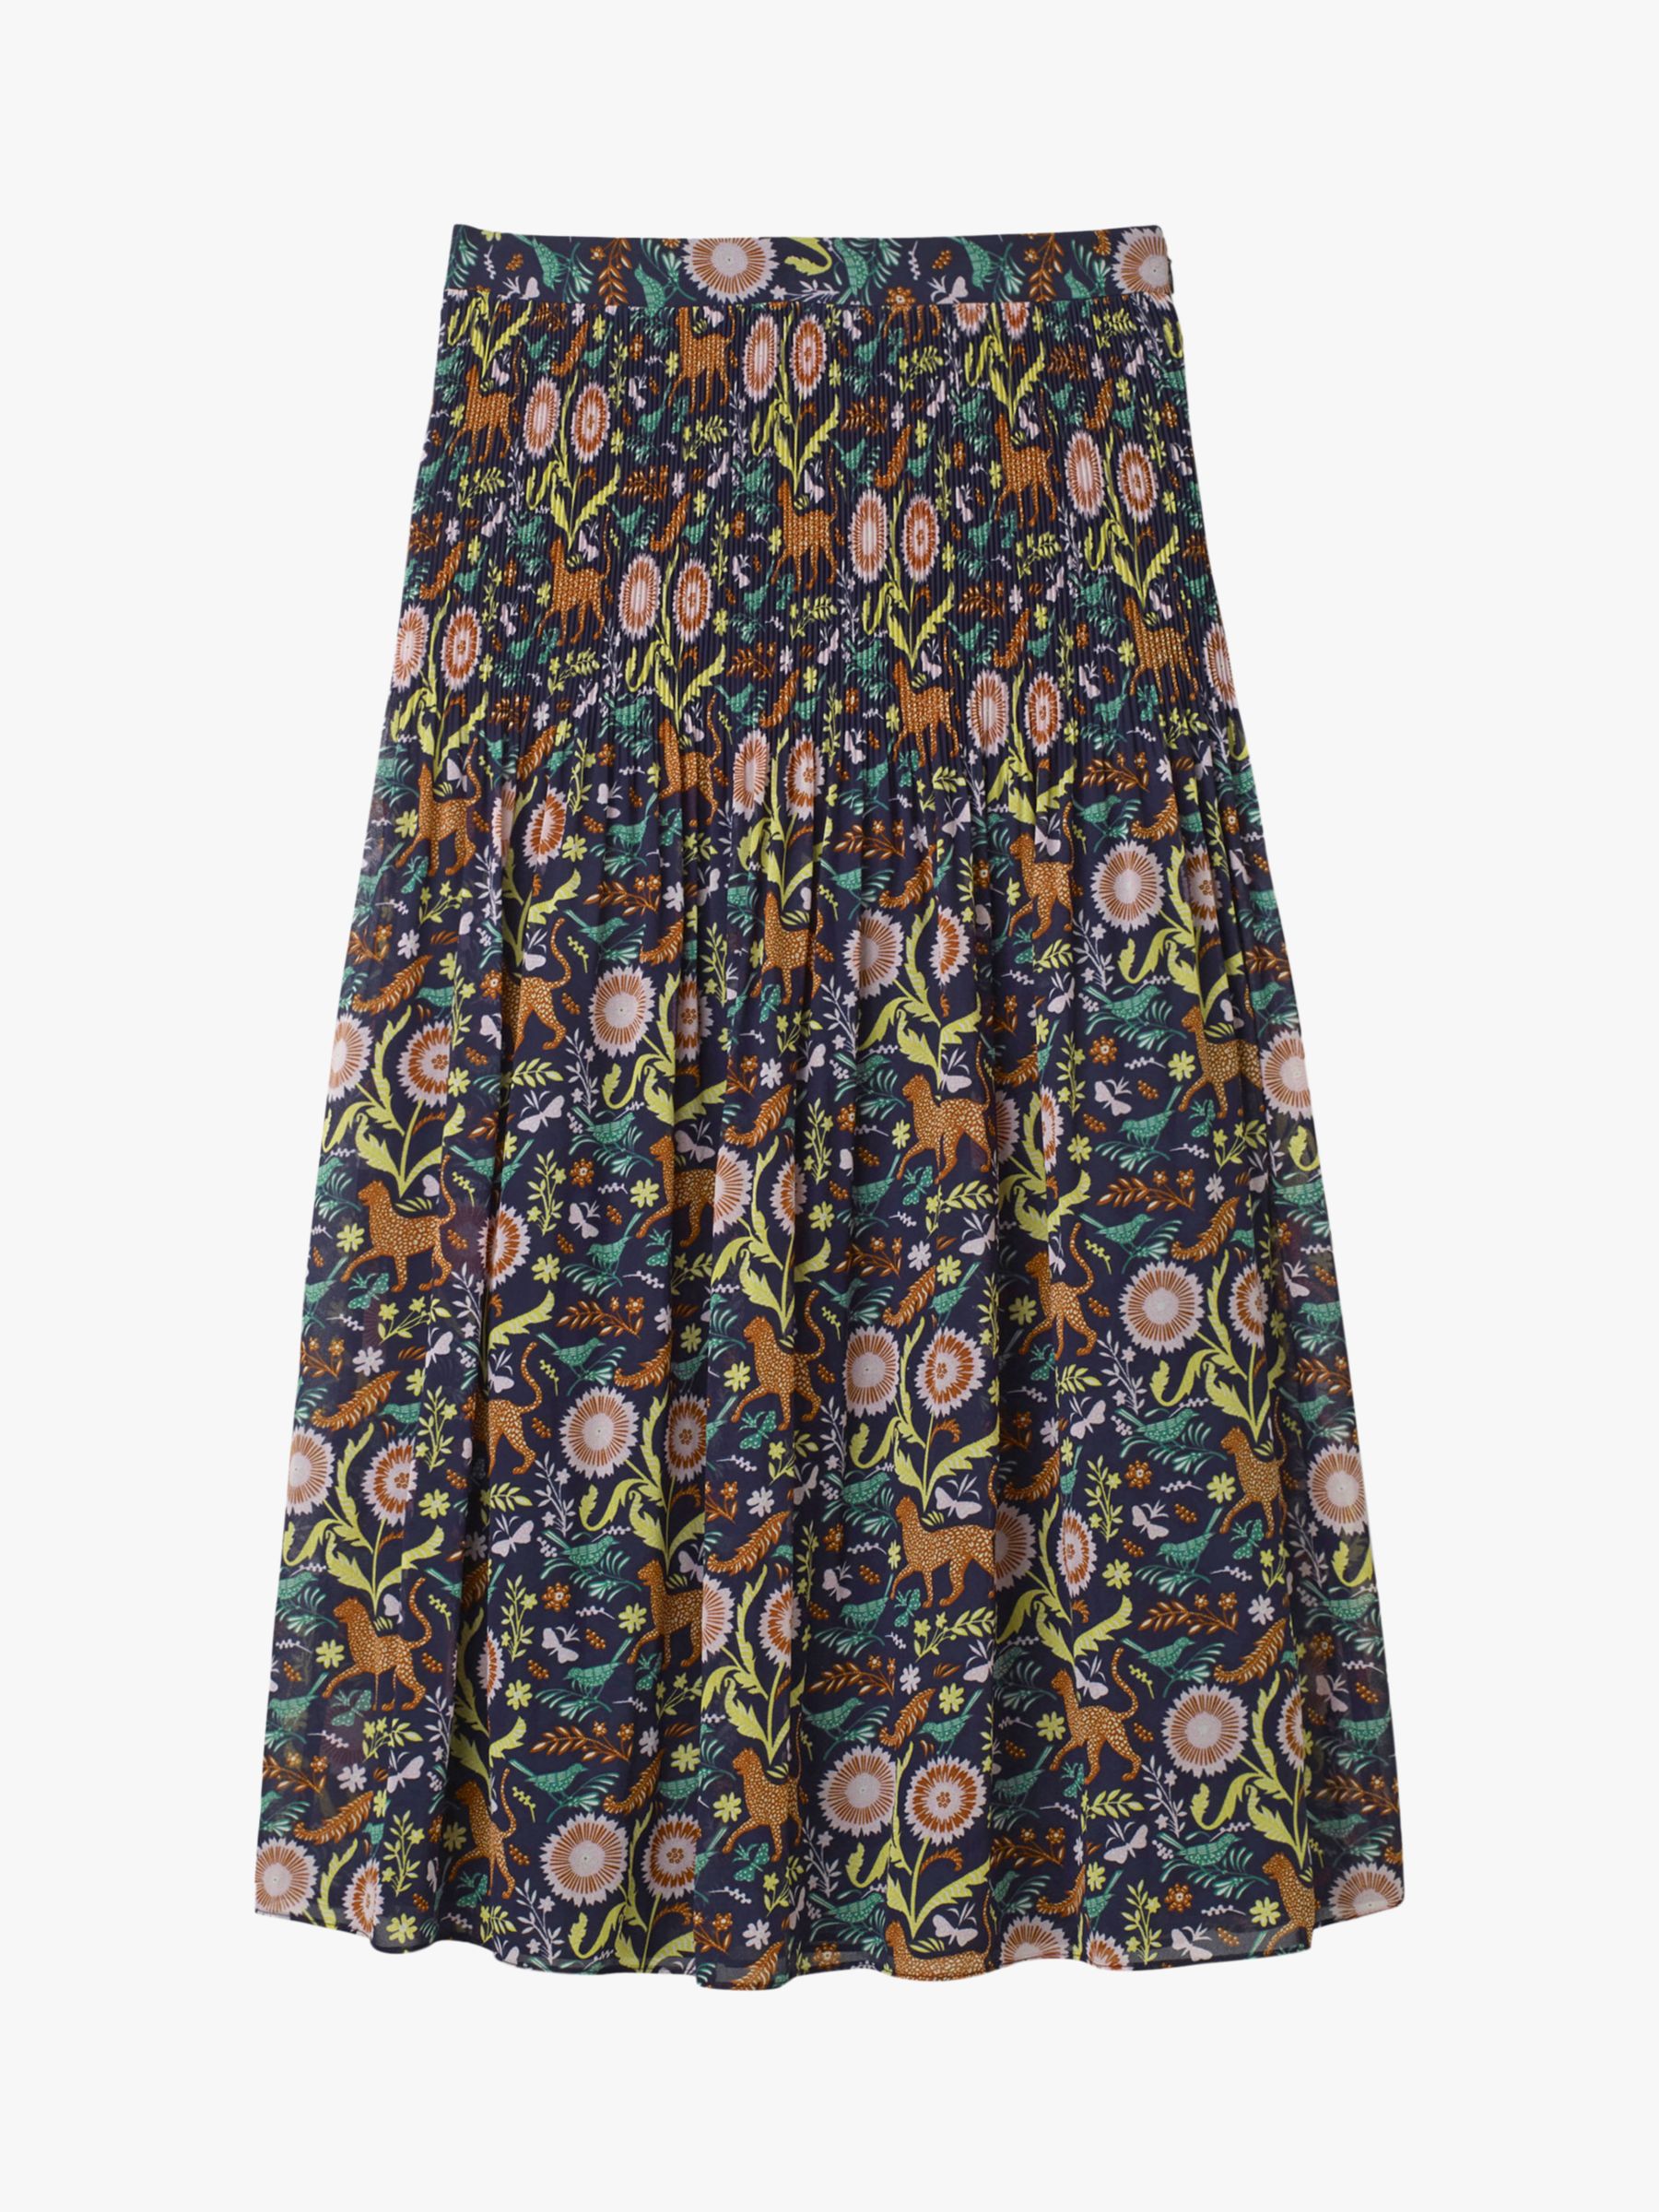 Boden Cassidy Animal and Nature Print Pleat Top Maxi Skirt, French Navy ...